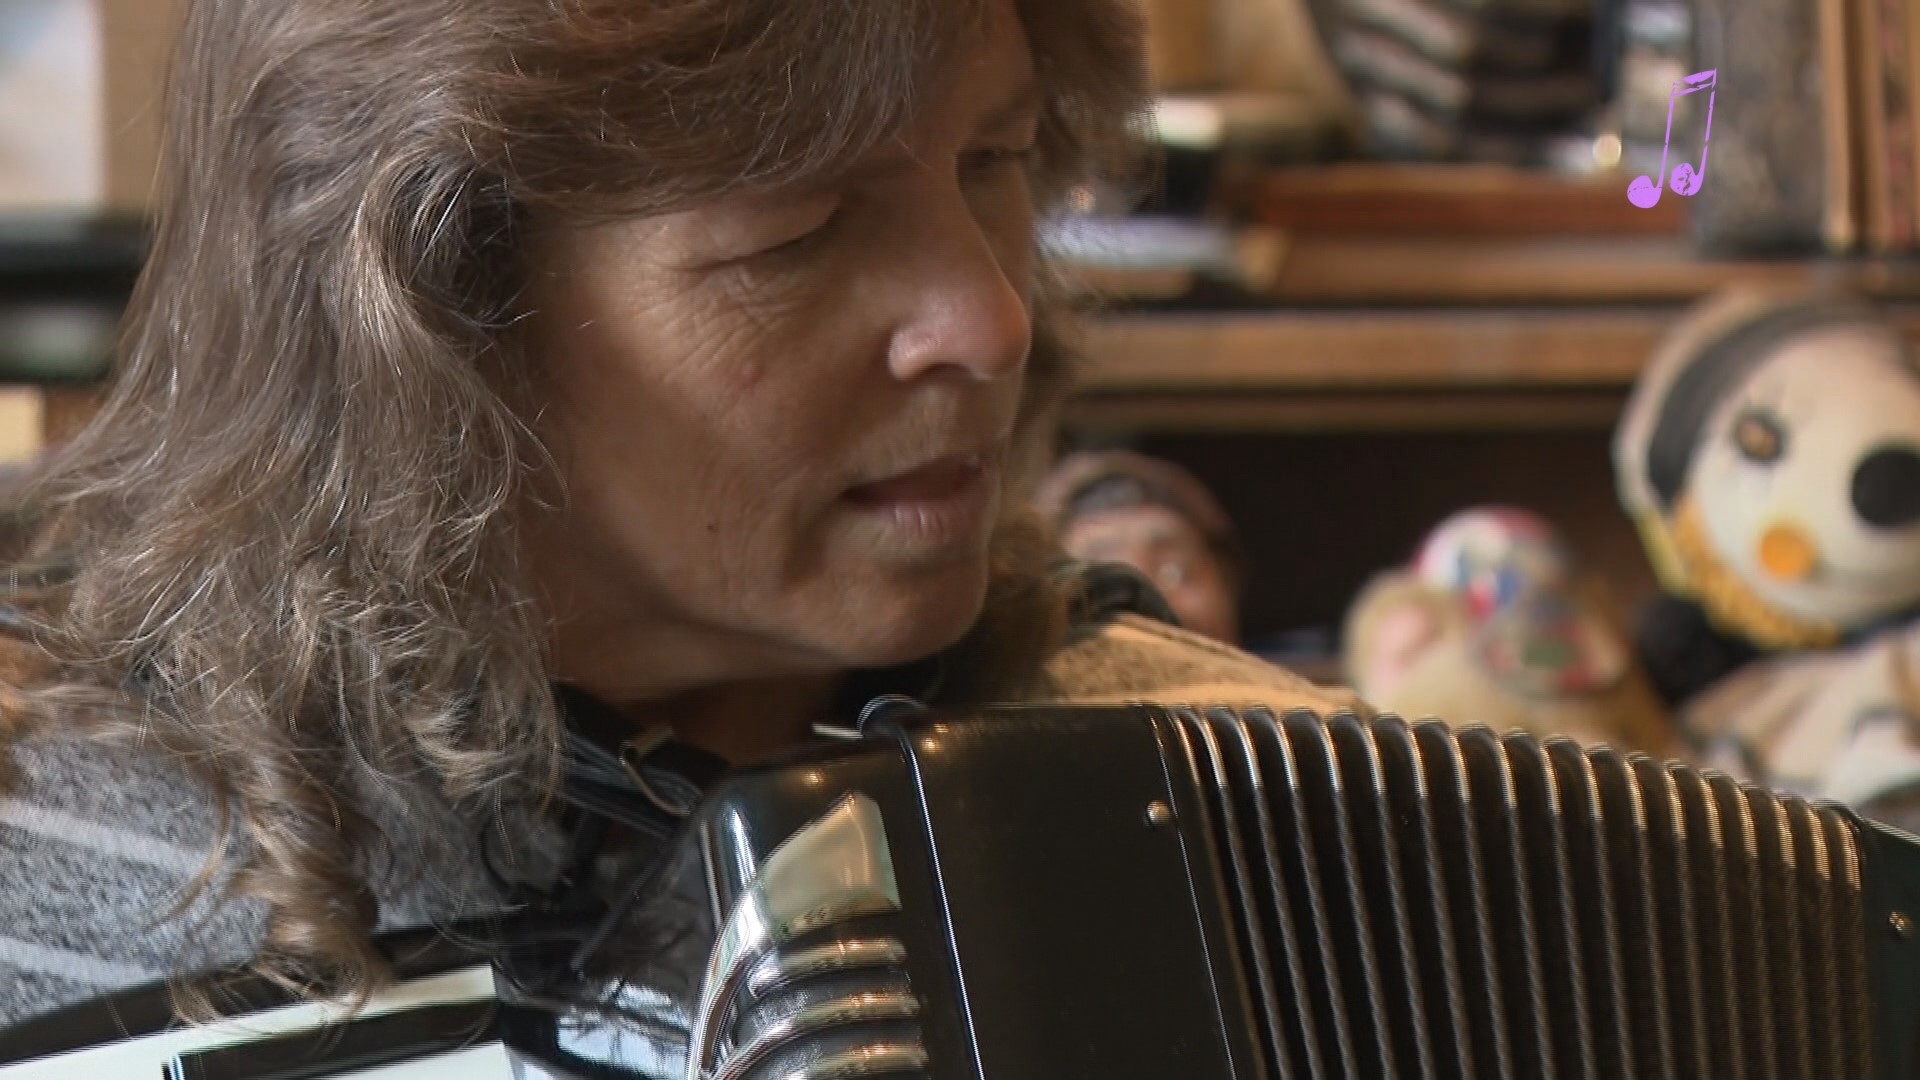 At Eileen Hagen Studios, students have been learning to play the accordion since 1961.